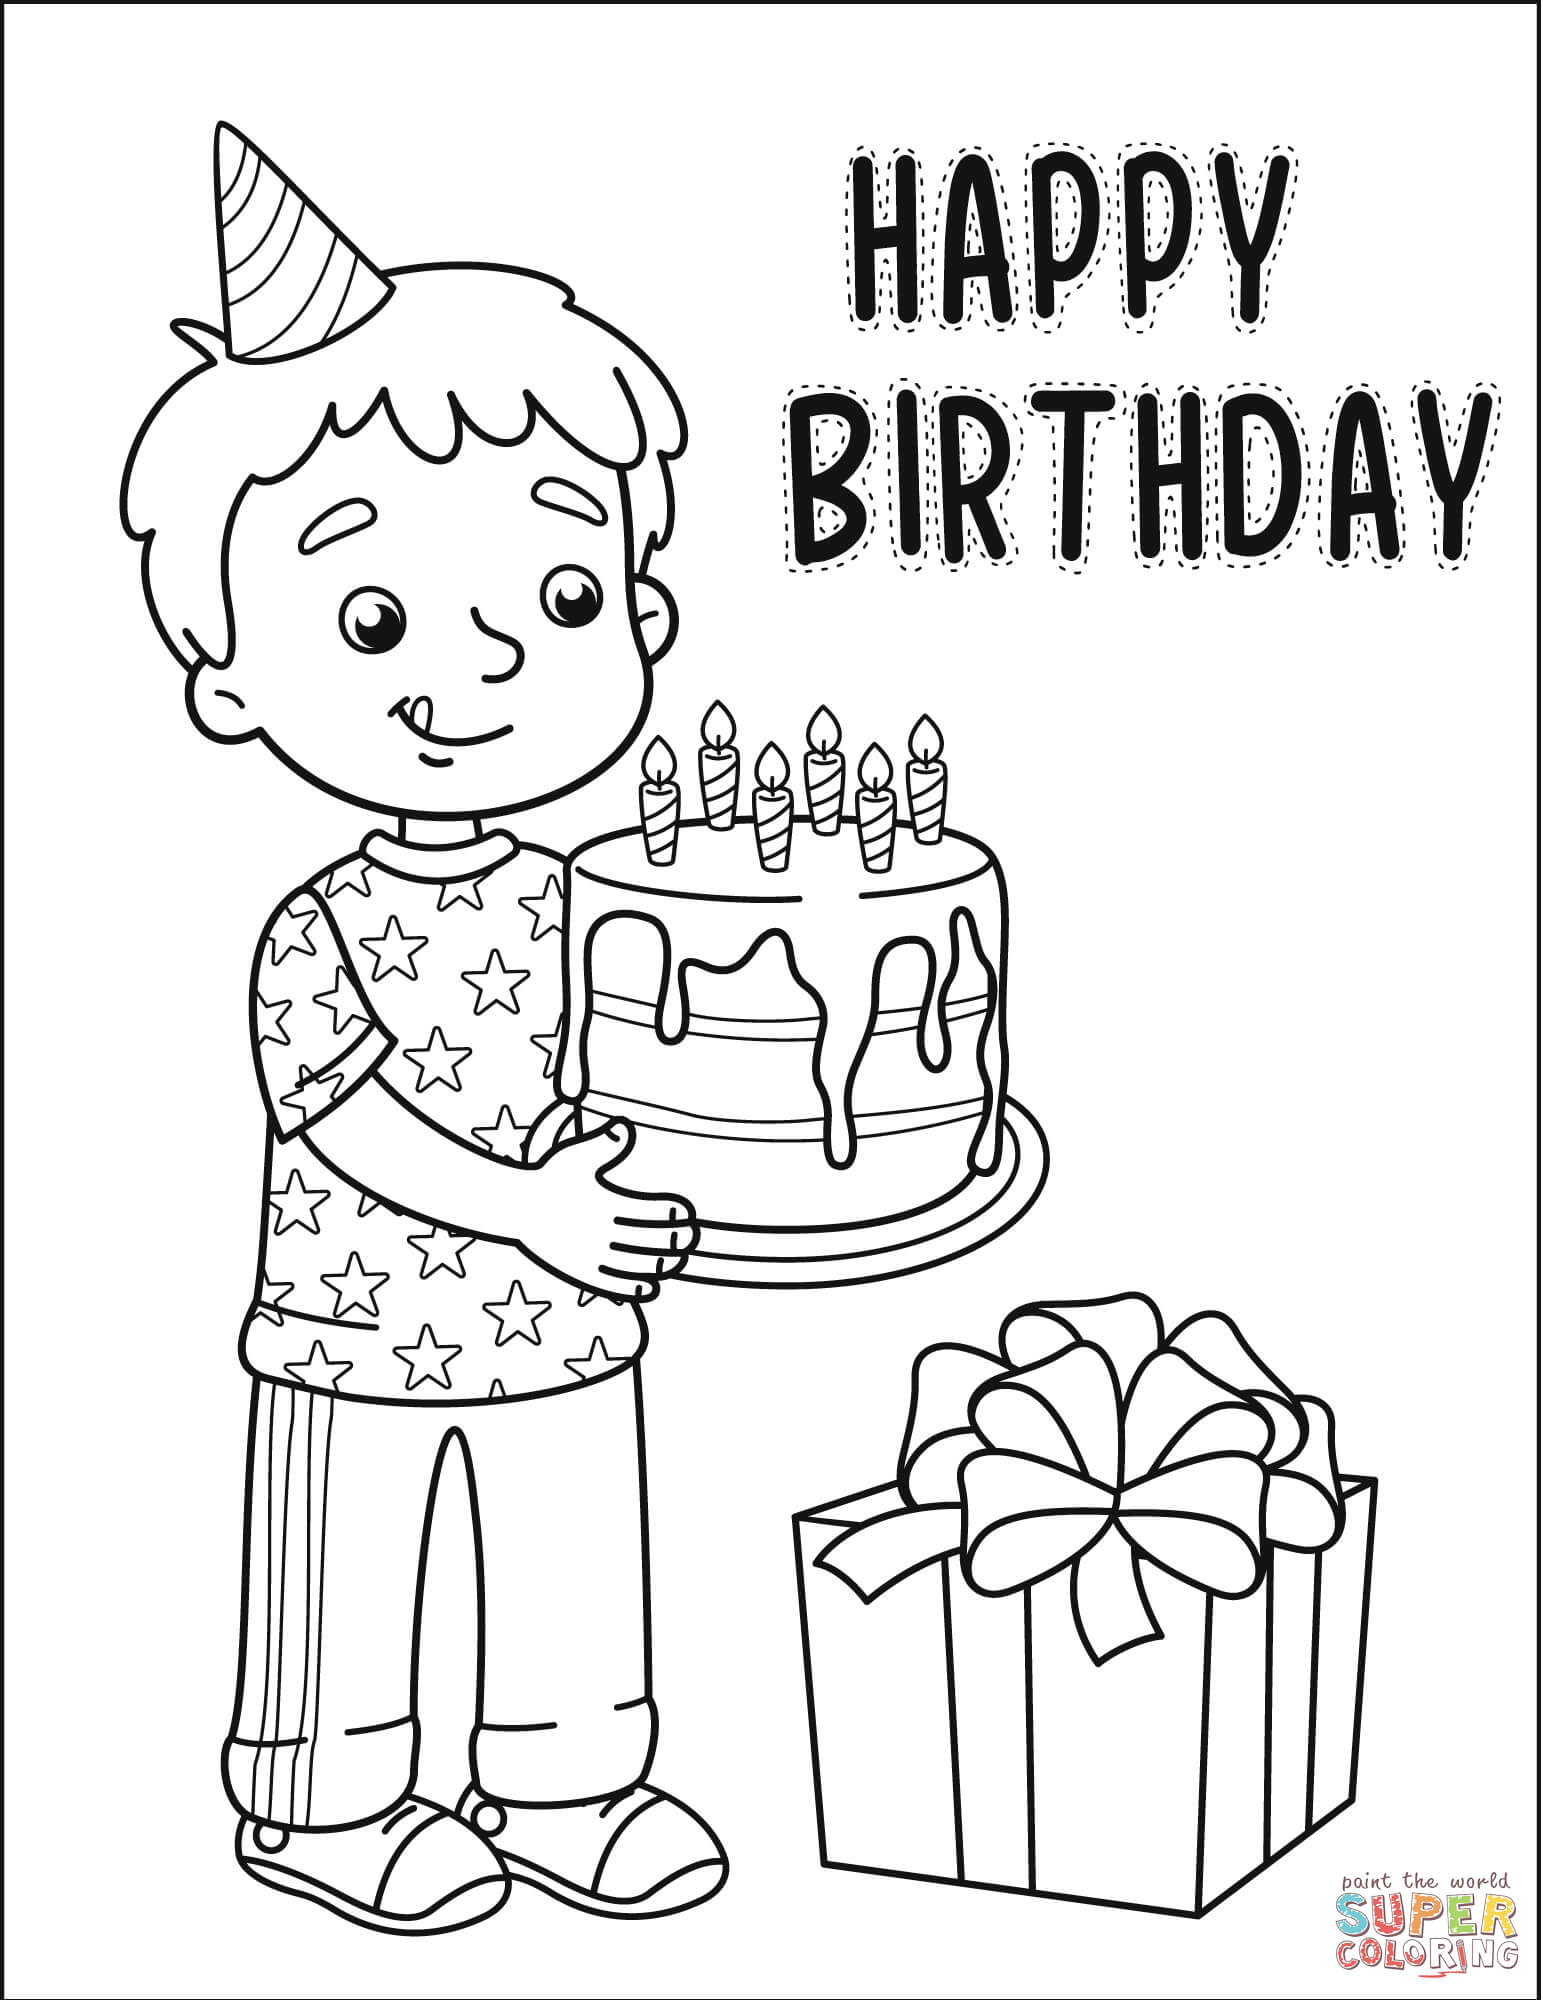 Happy Birthday with Boy coloring page | Free Printable Coloring Pages